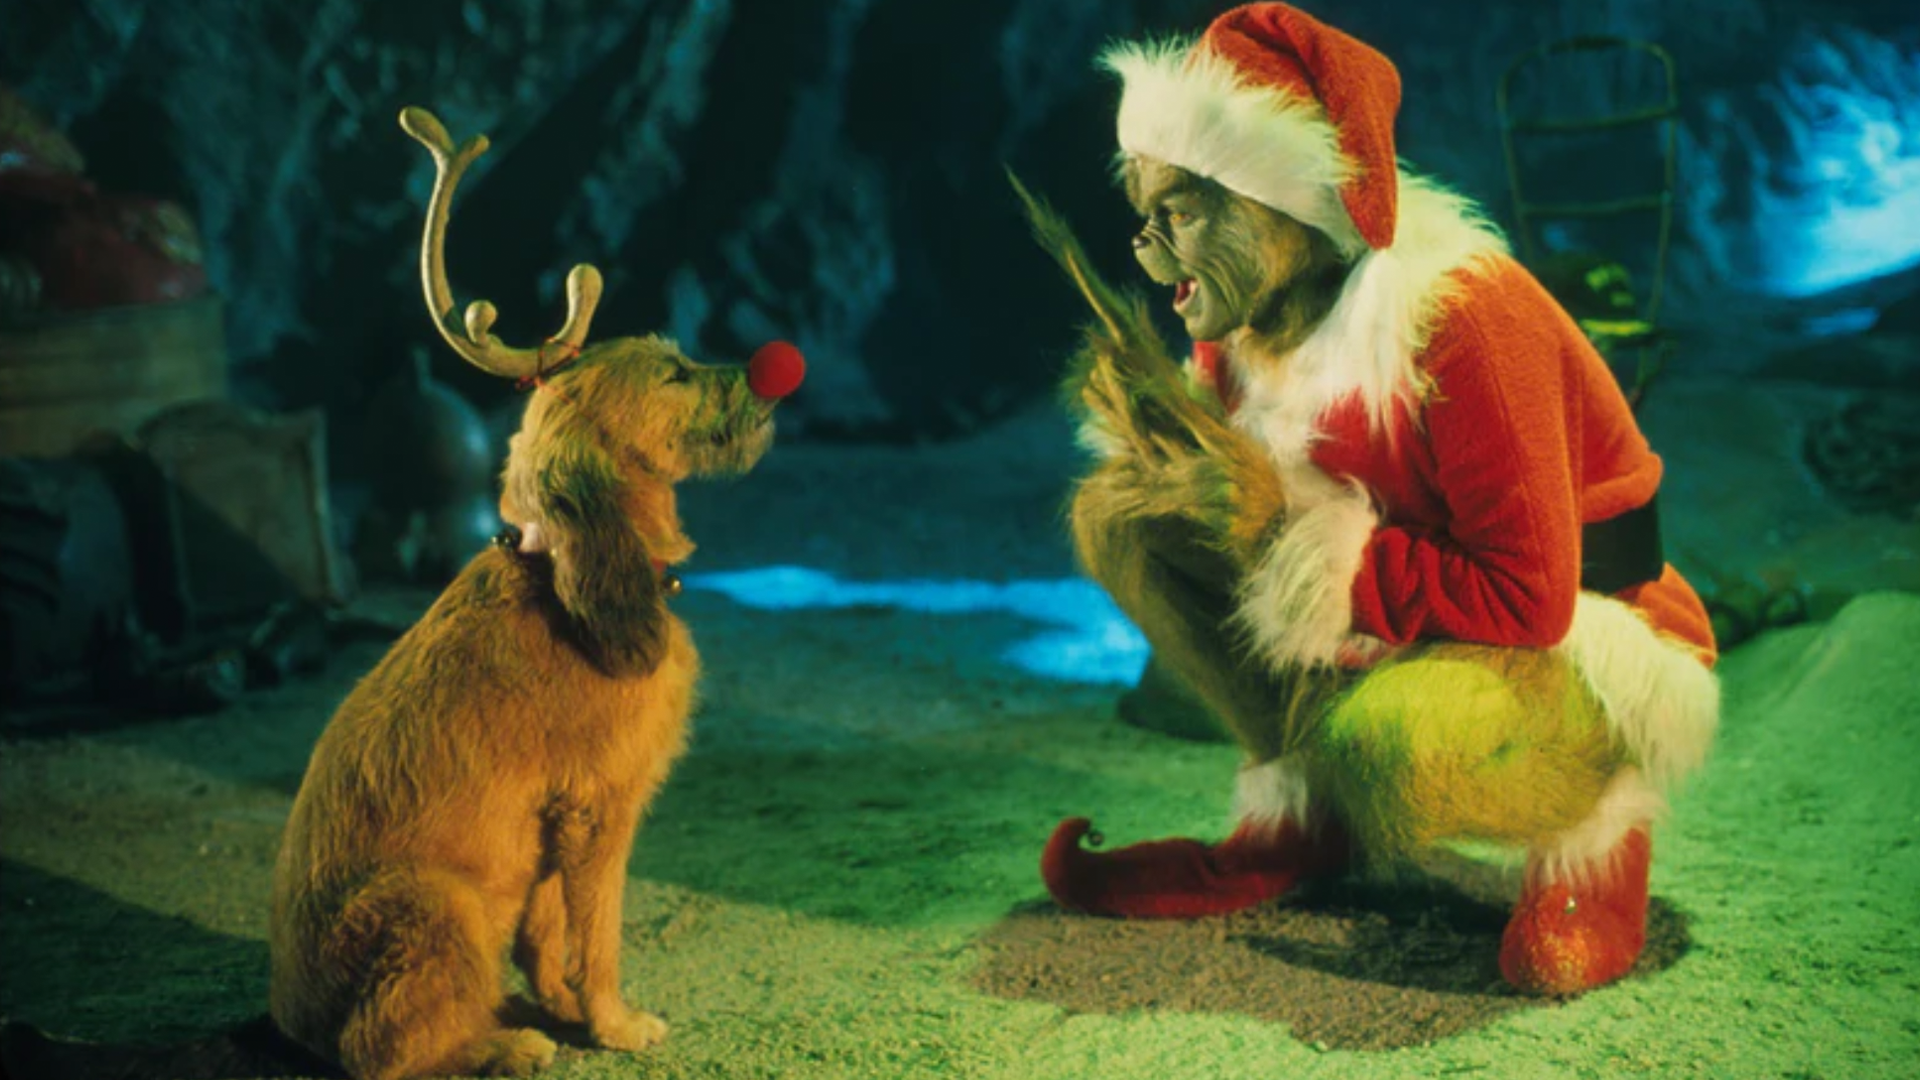 The Grinch with his dog